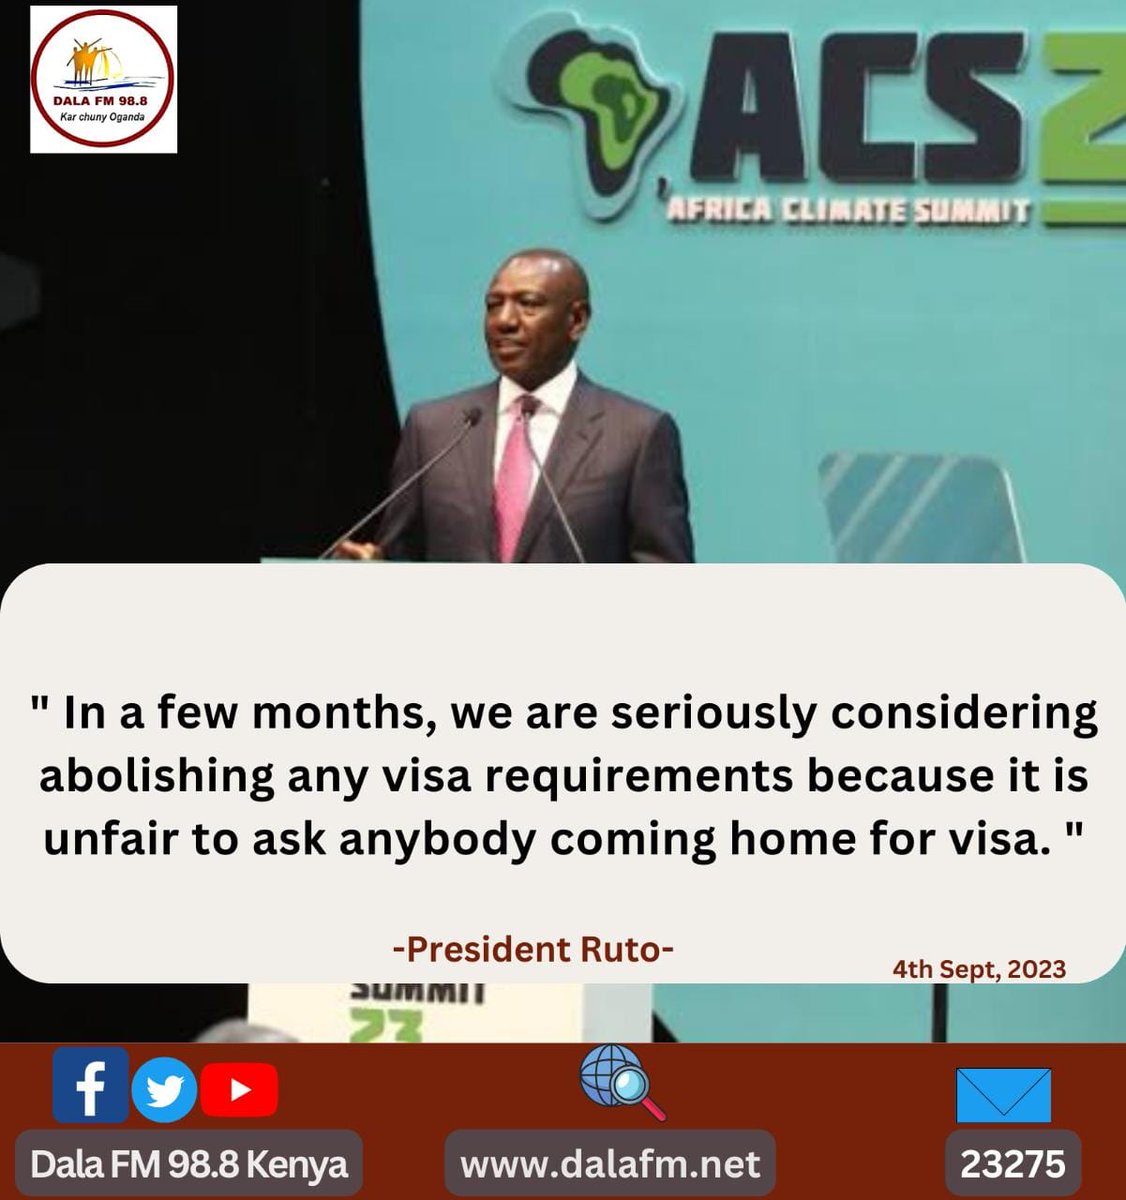 ' In a few months, we are seriously considering abolishing any visa requirements because it is unfair to ask anybody coming home for visa. '

-President Ruto-
#NationClimate
#AfricaClimateSummit23 
#ACS23